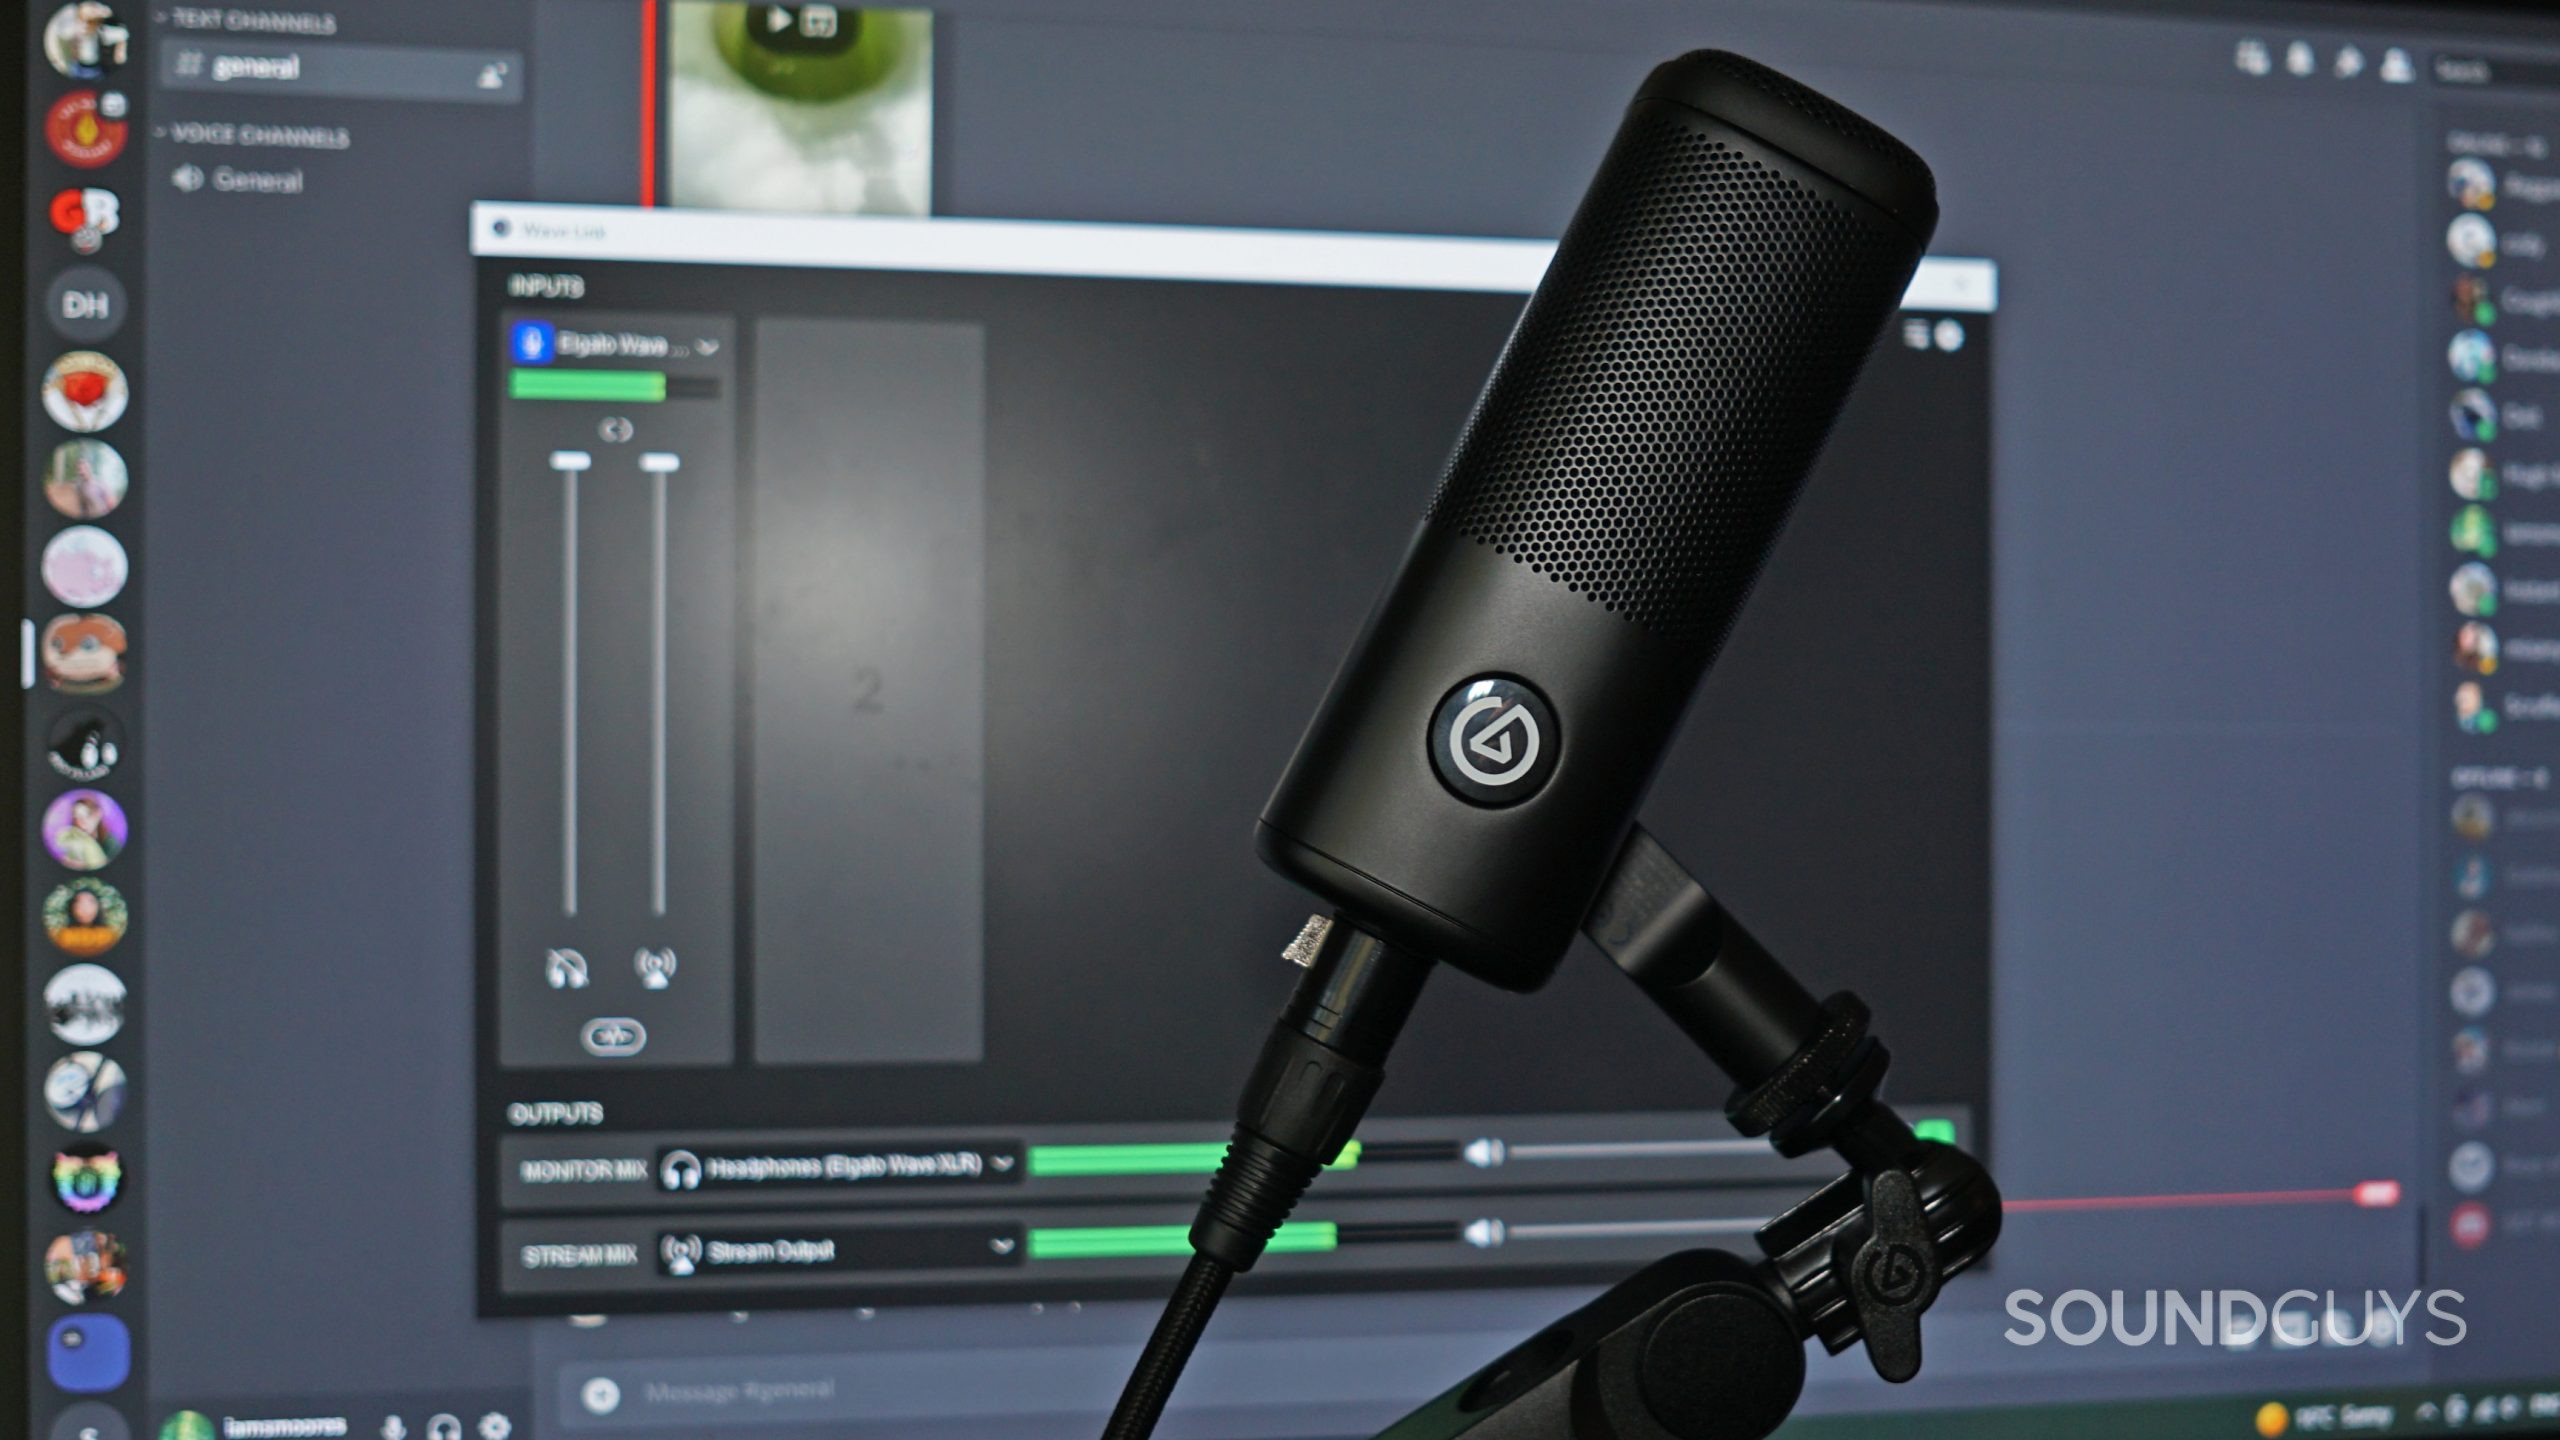 The Elgato Wave DX sits on a microphone arm in front of a viewsonic monitor displaying the Elgato Wave Link app